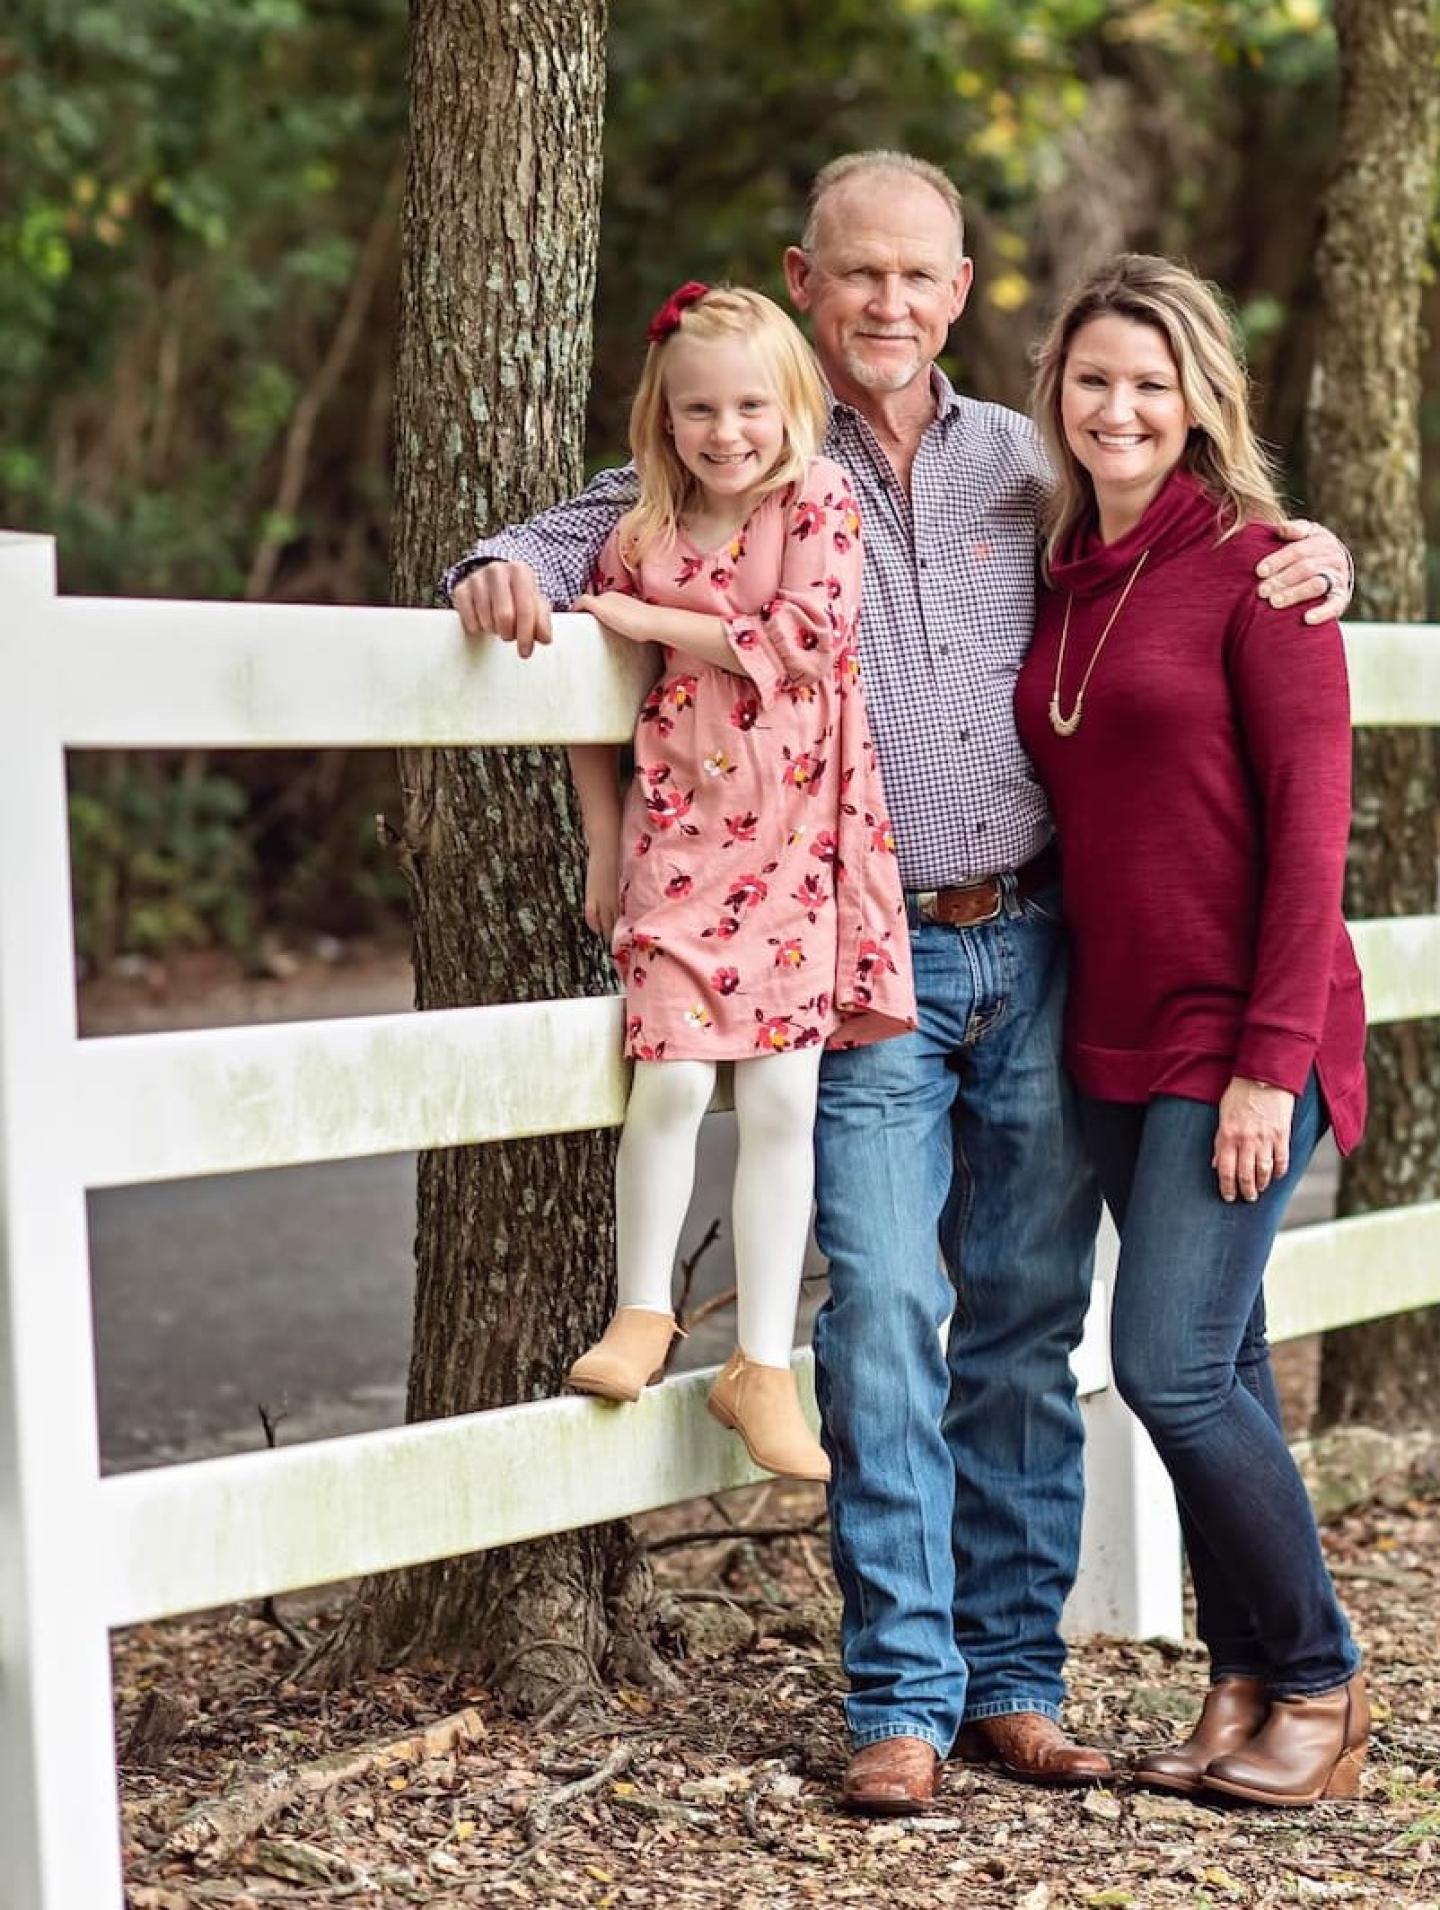 Chuck Emerson in the center with daughter Carsyn on the left and wife, Carol on the right standing next to a fence on their 720 acre farm that sits between Belton and Little River-Academy in Central Texas.